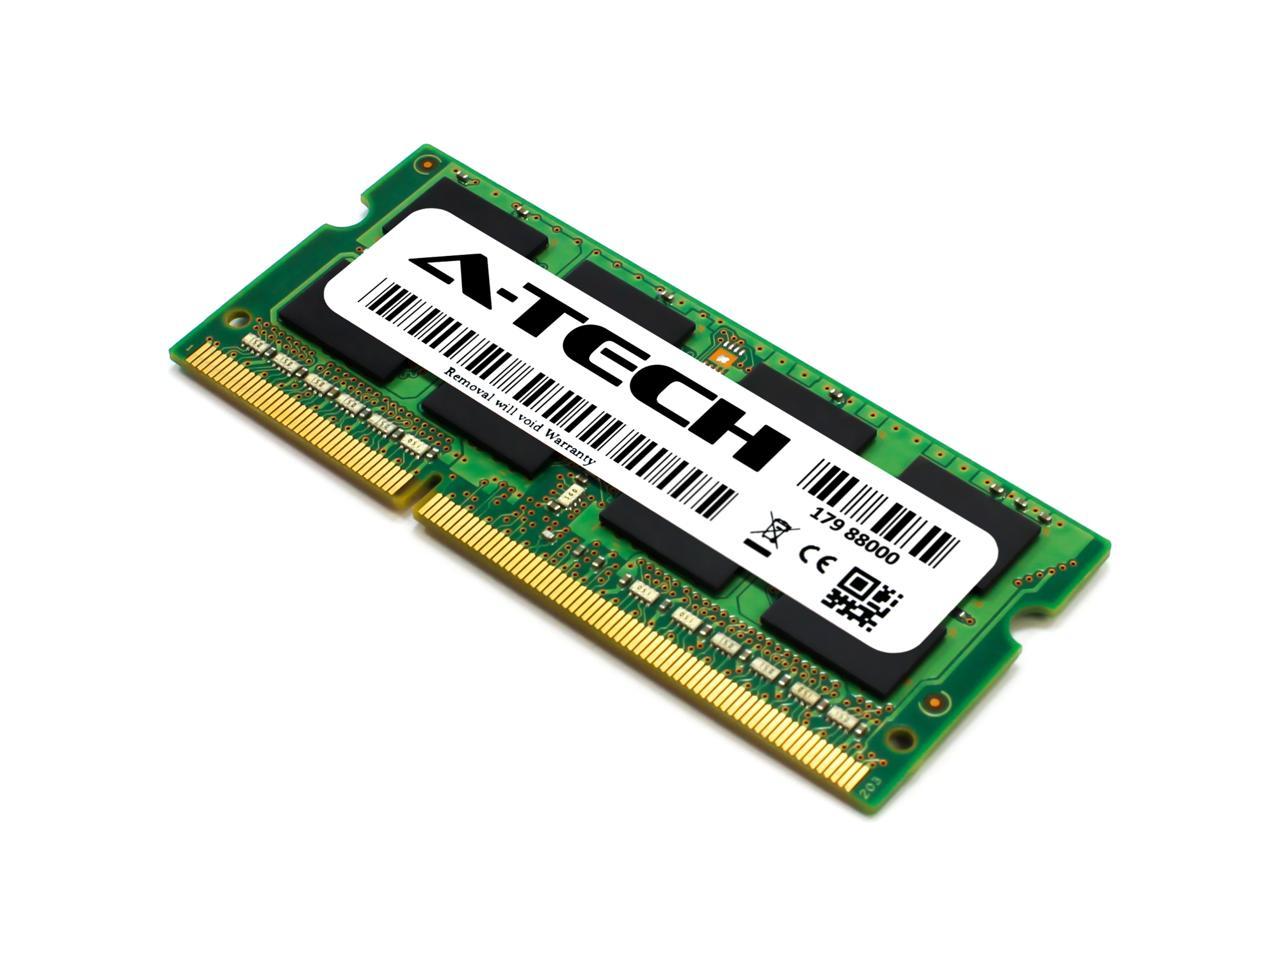 ATMS277659B12351X1 A-Tech 8GB Module for Dell Inspiron 17R 7720 Laptop & Notebook Compatible DDR3/DDR3L PC3-12800 1600Mhz Memory Ram 